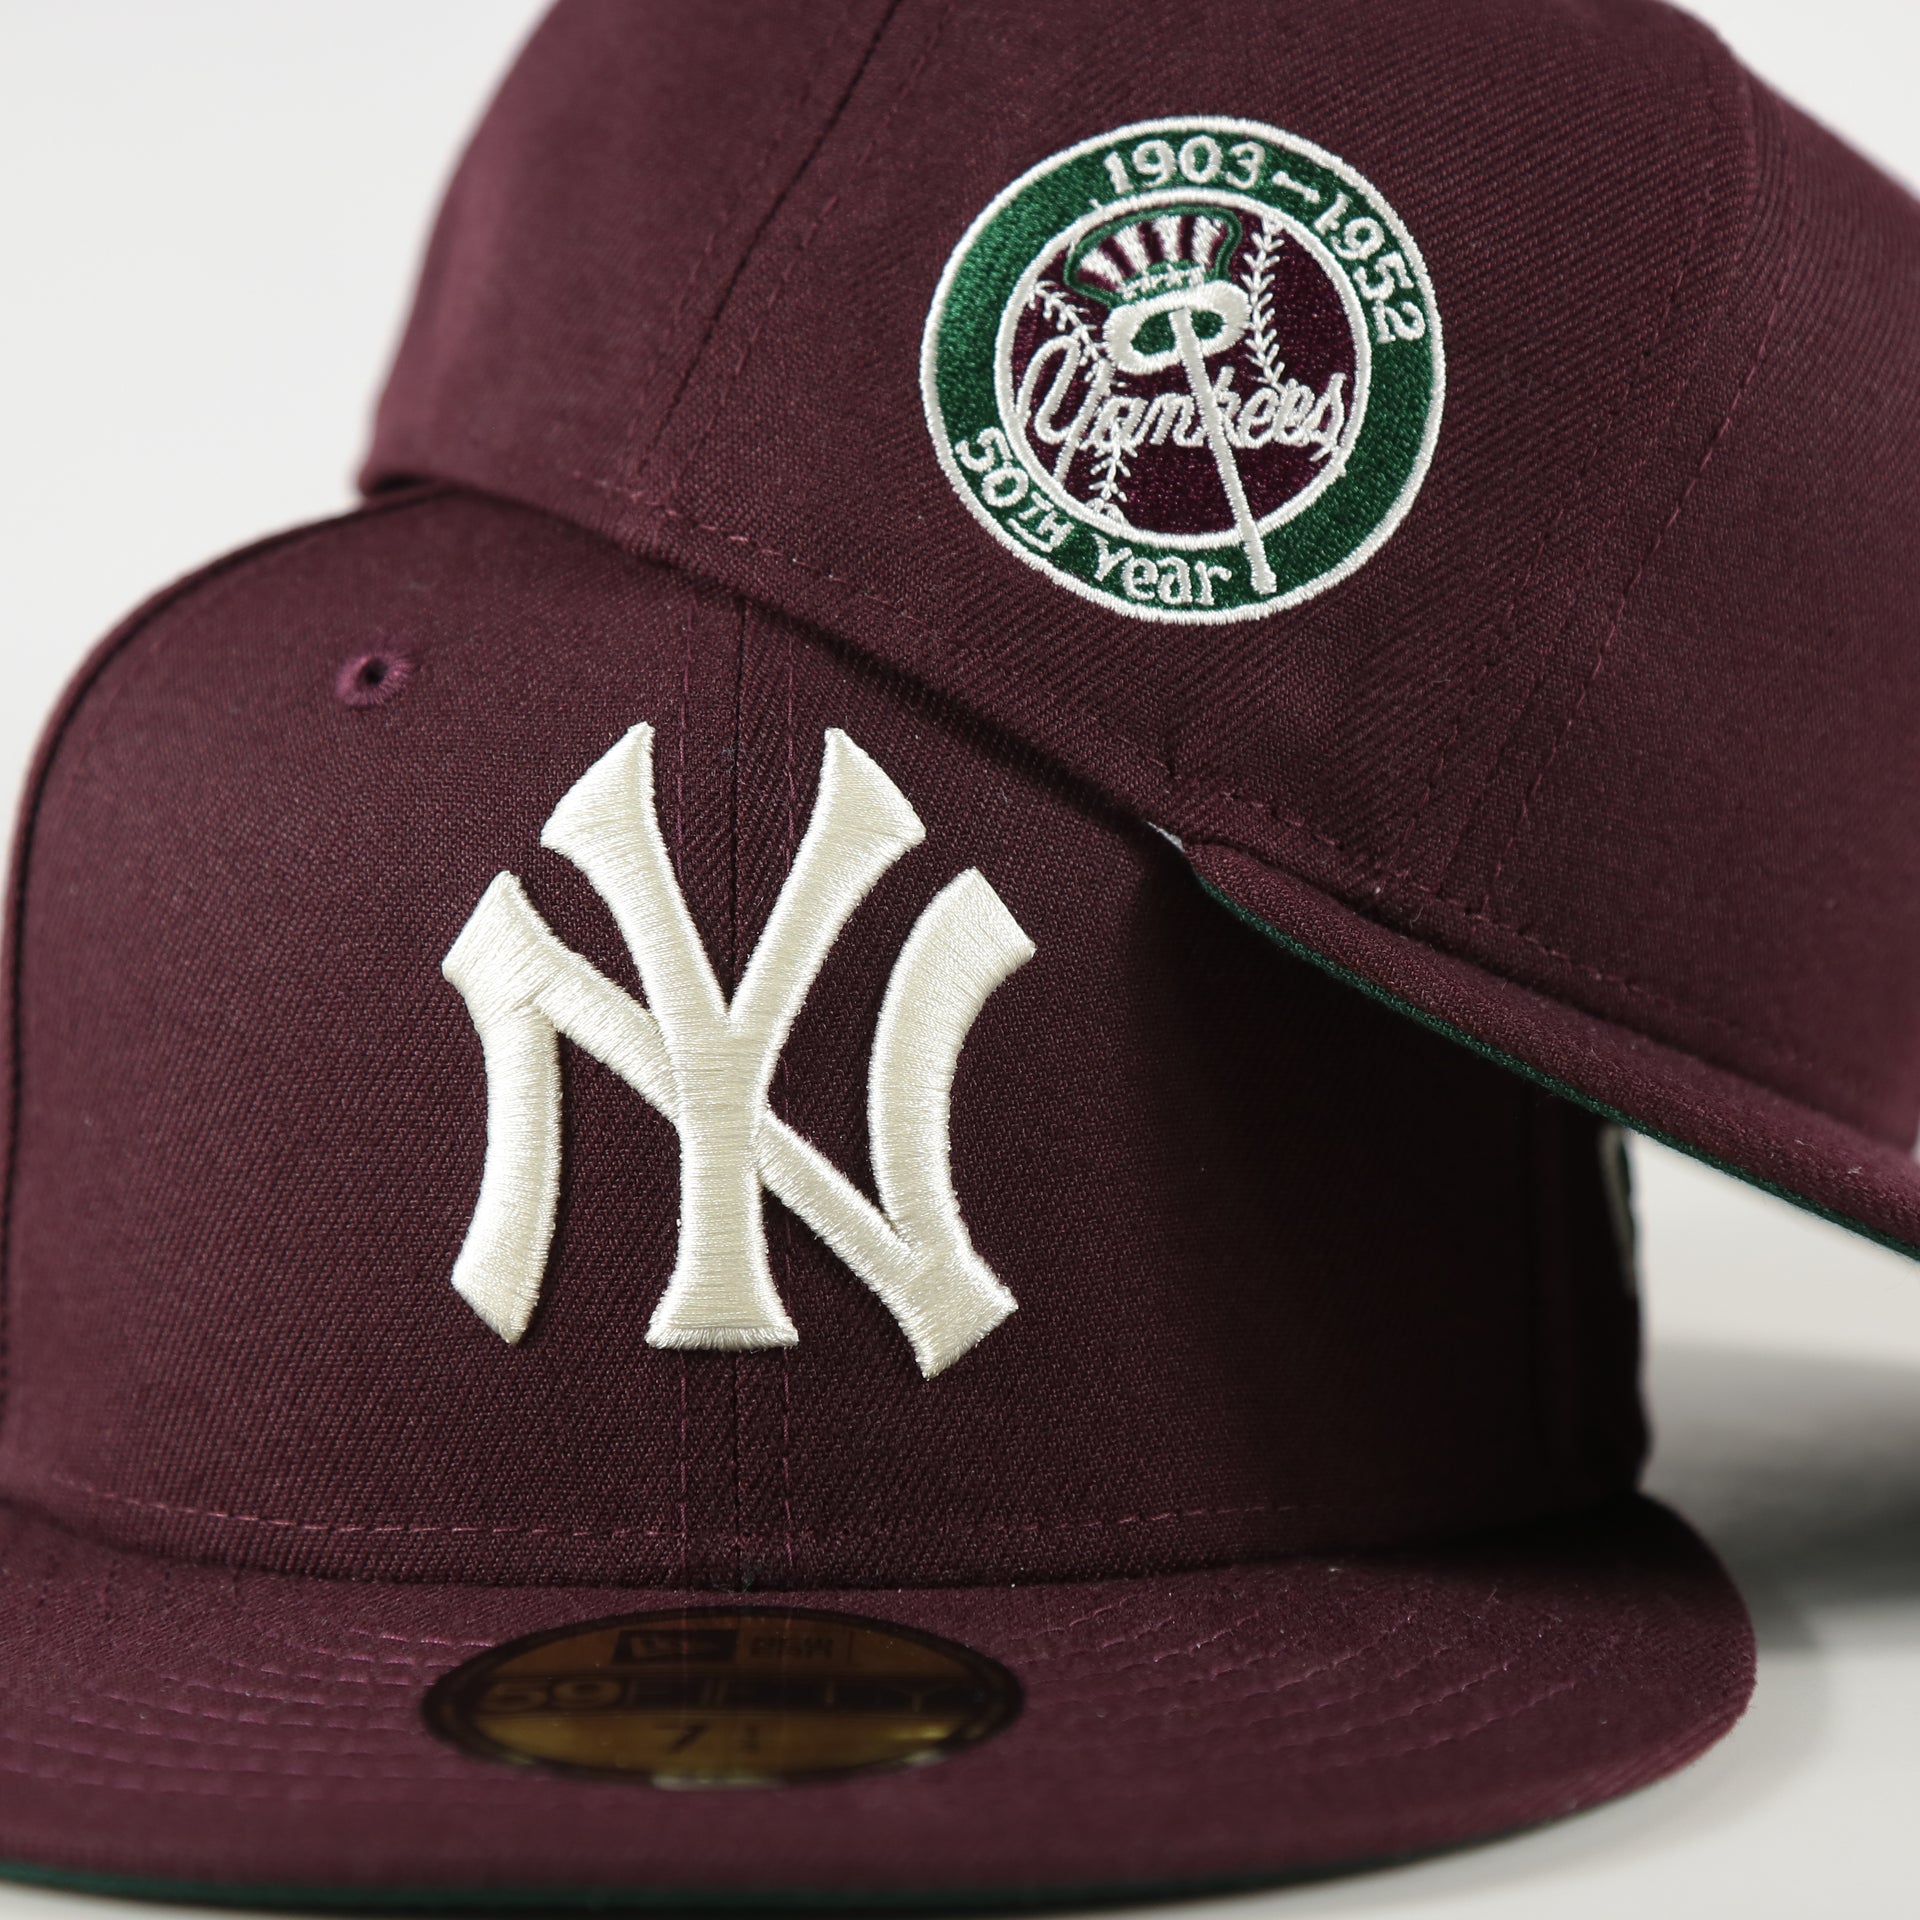 Side Patch on the New York Yankees Cooperstown 50th Year Side Patch Dark Green UV 59Fifty Fitted Cap | Vintage Christmas Movie Pack